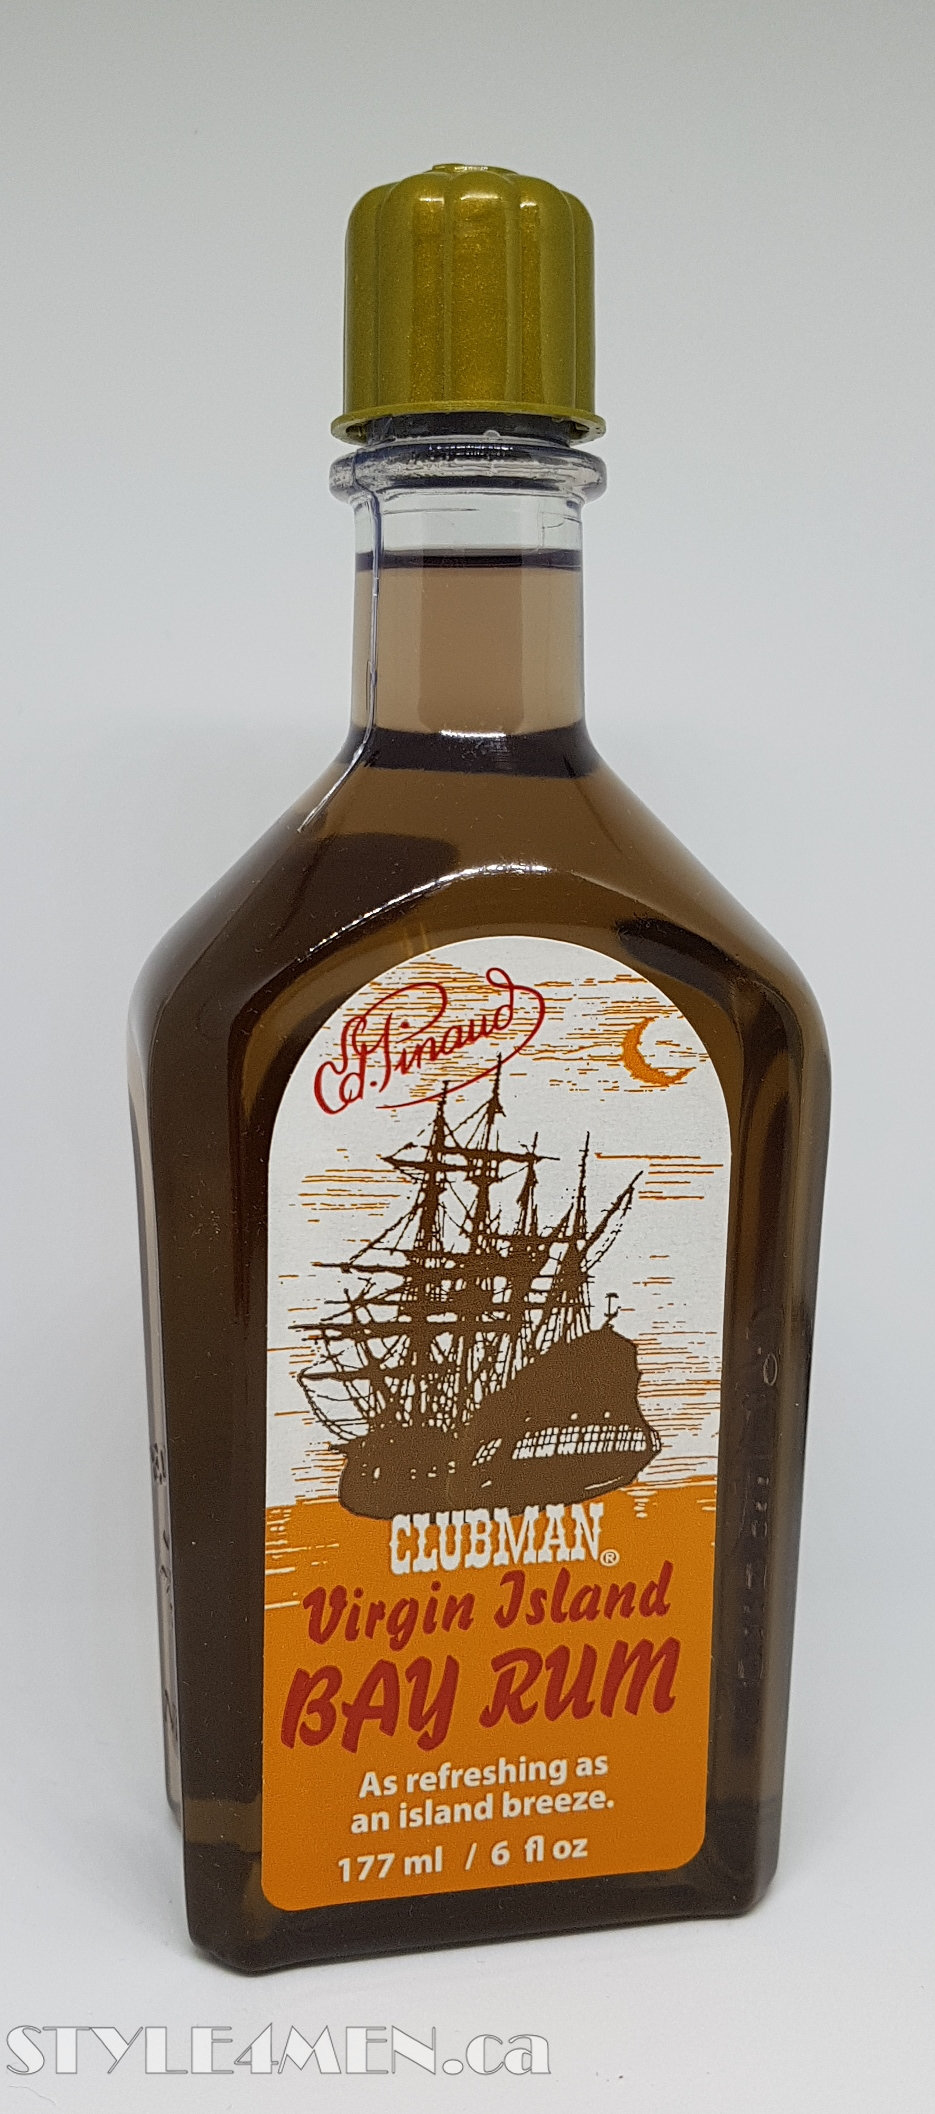 Pinaud-Clubman Virgin Island Bay Rum After-Shave – Authentic scent